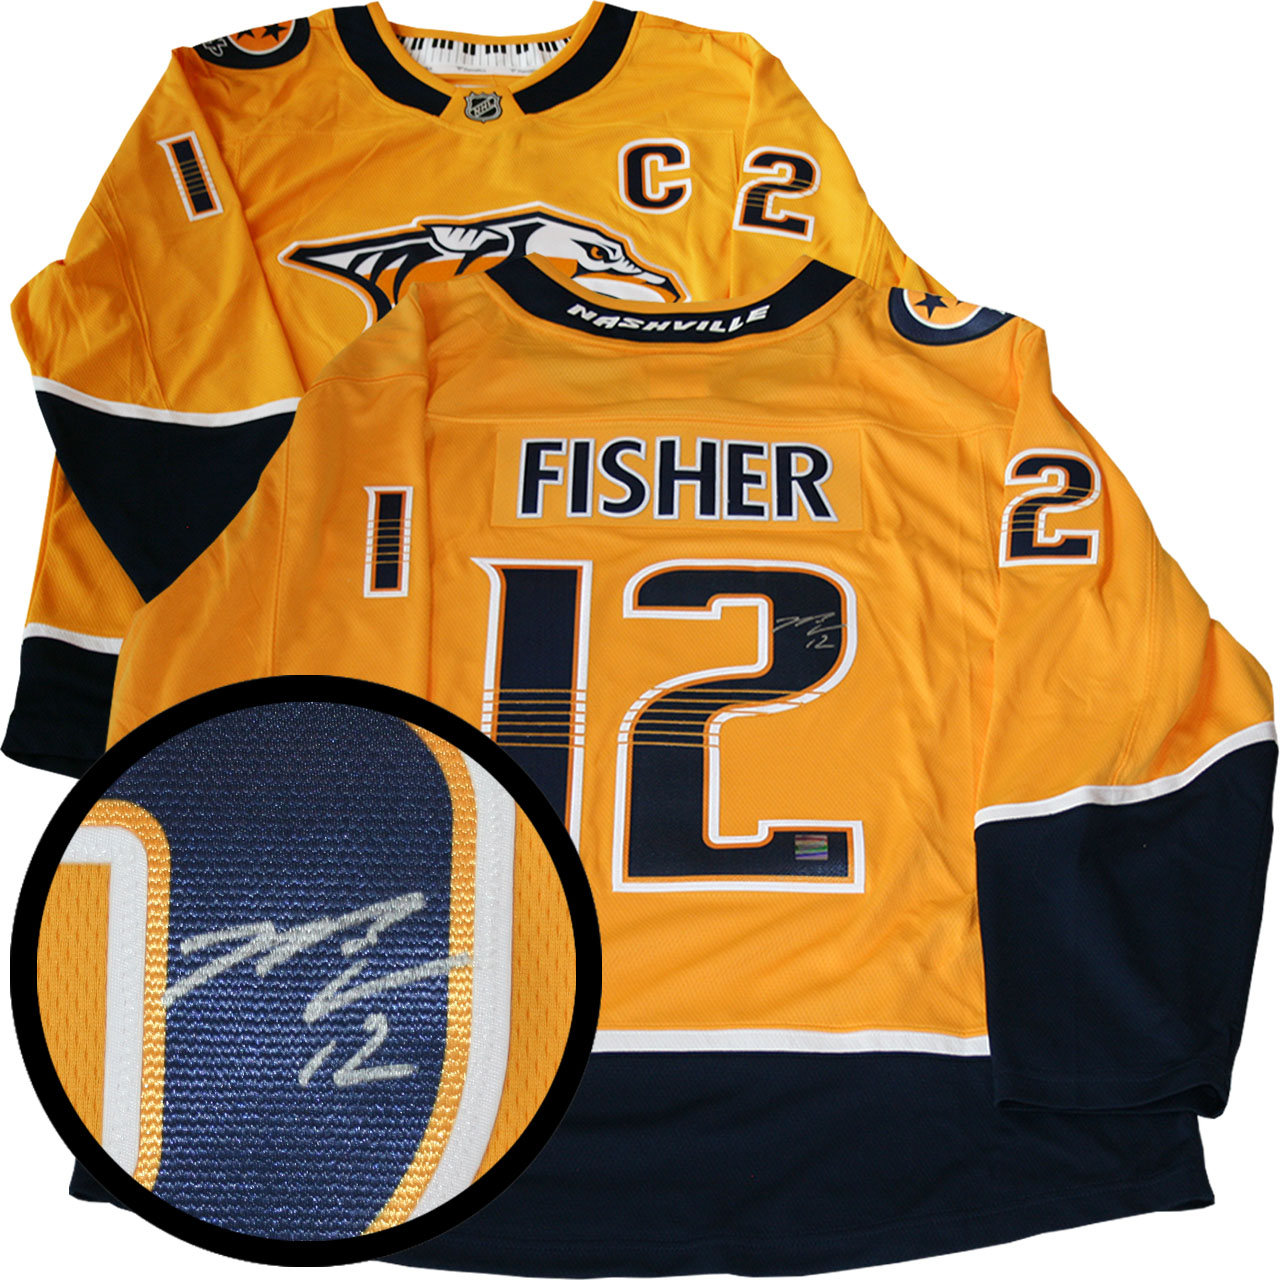 mike fisher jersey